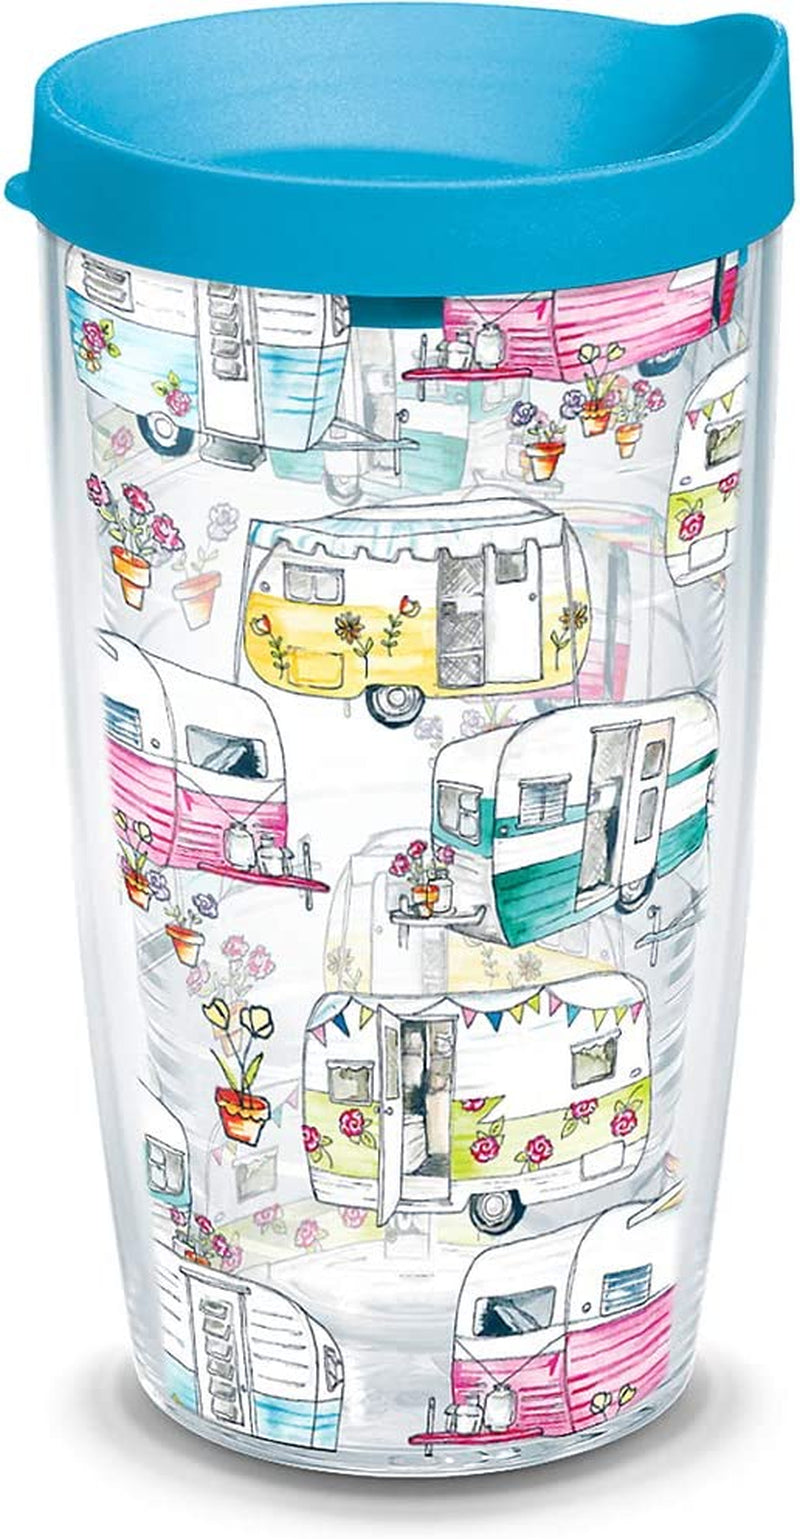 Tervis Made in USA Double Walled Colorful Camper Insulated Tumbler Cup Keeps Drinks Cold & Hot, 16Oz, Clear